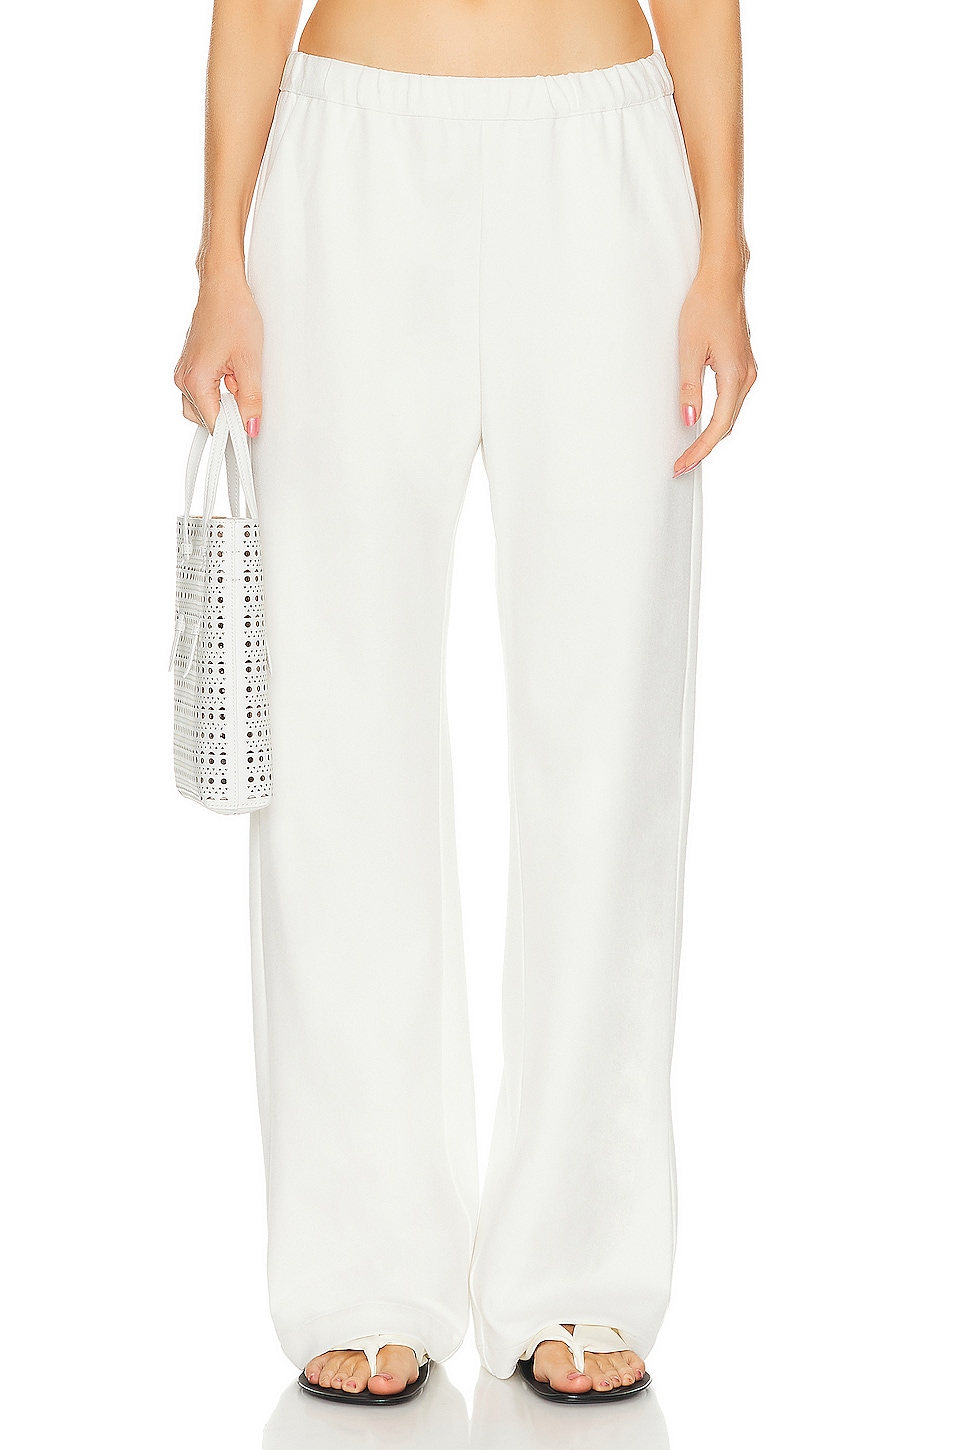 Image 1 of Enza Costa Crepe Everywhere Pant in Off White